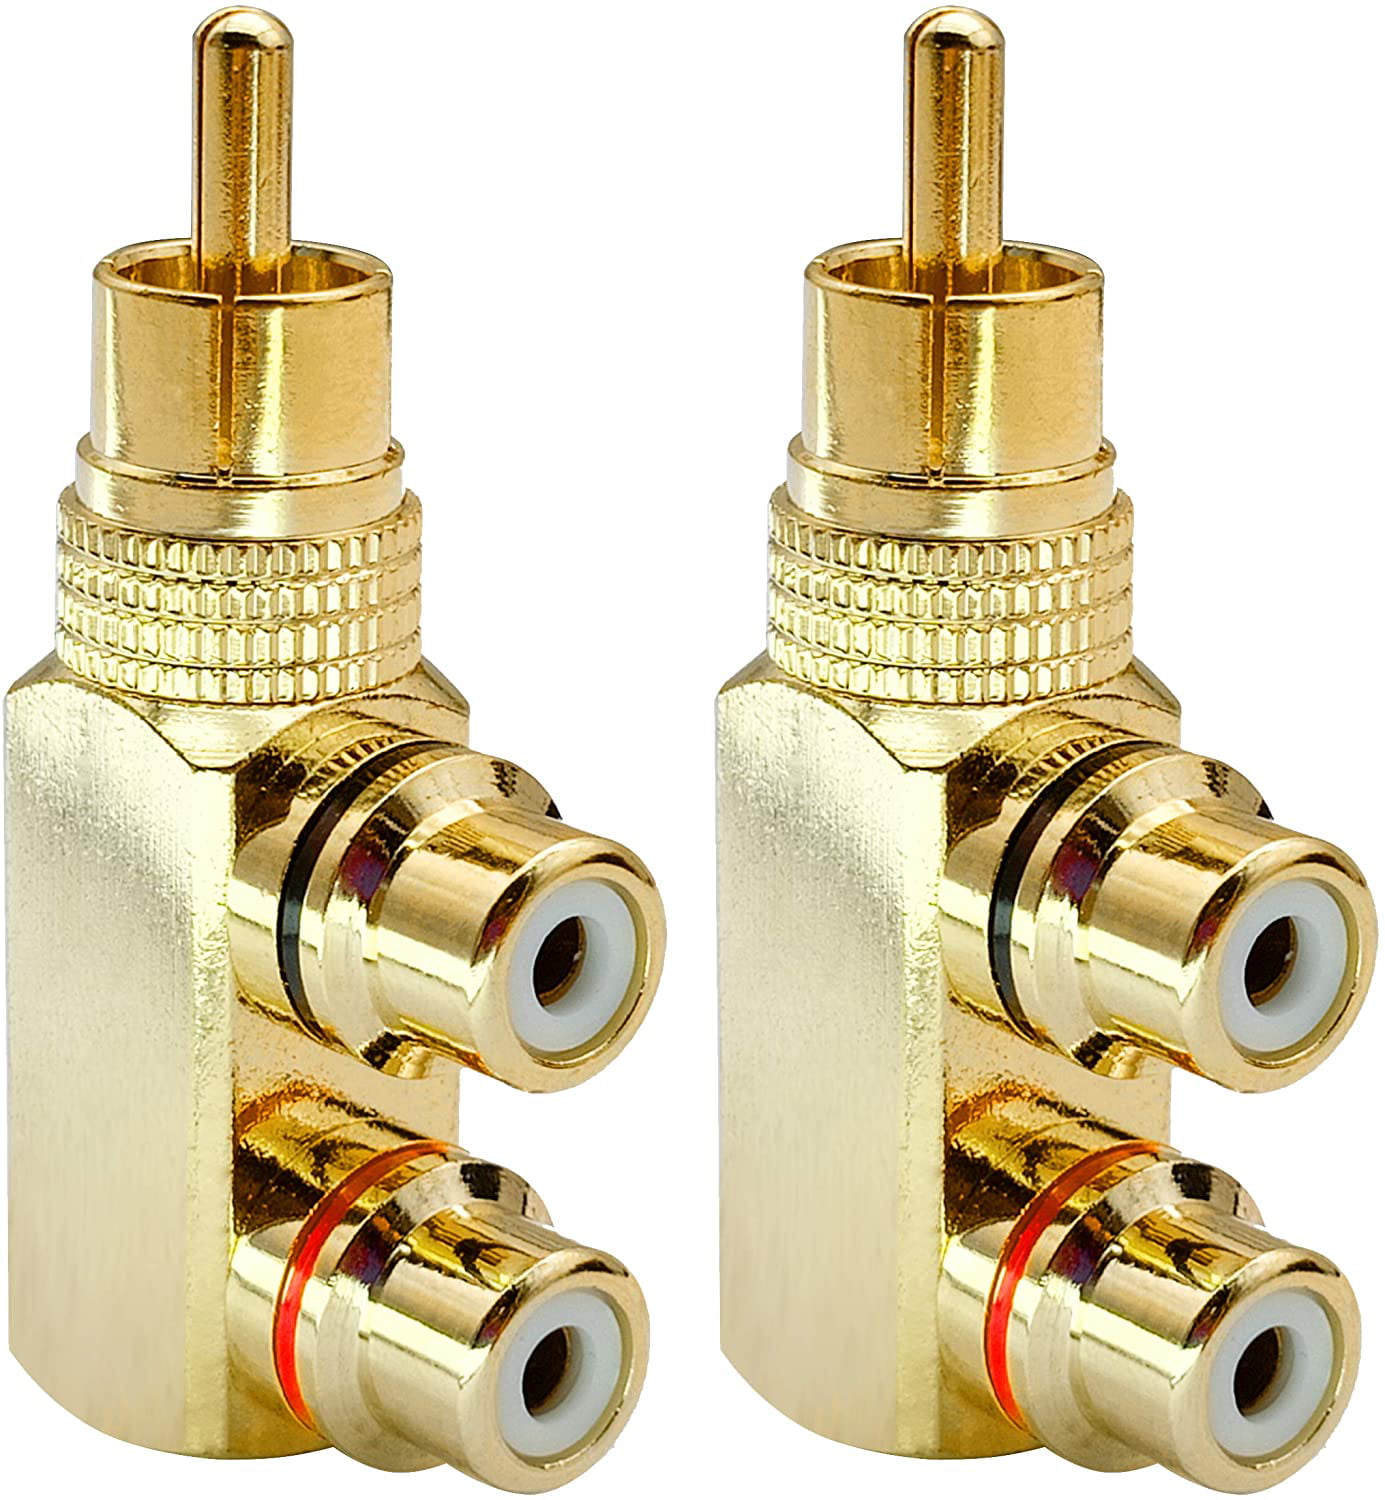 2xRCA Audio Y Splitter Plug Adapter 1 Male to 2 Female Gold Plated Connector 